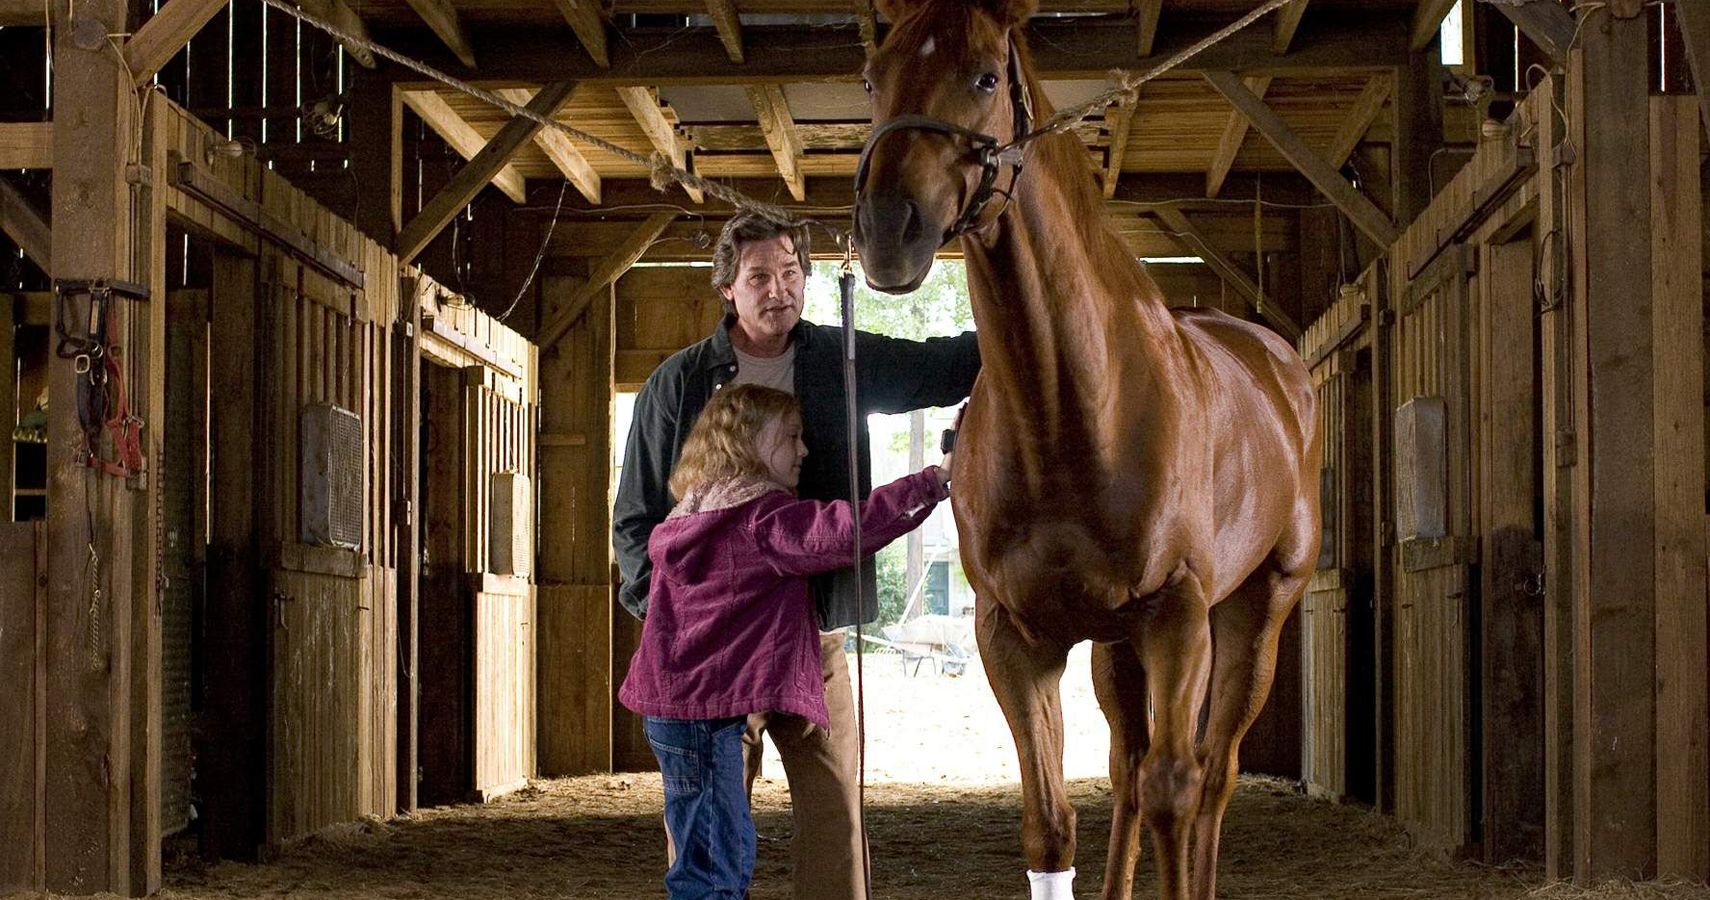 A man and a young girl pet a pretty horse in a barn in the movie Dreamer